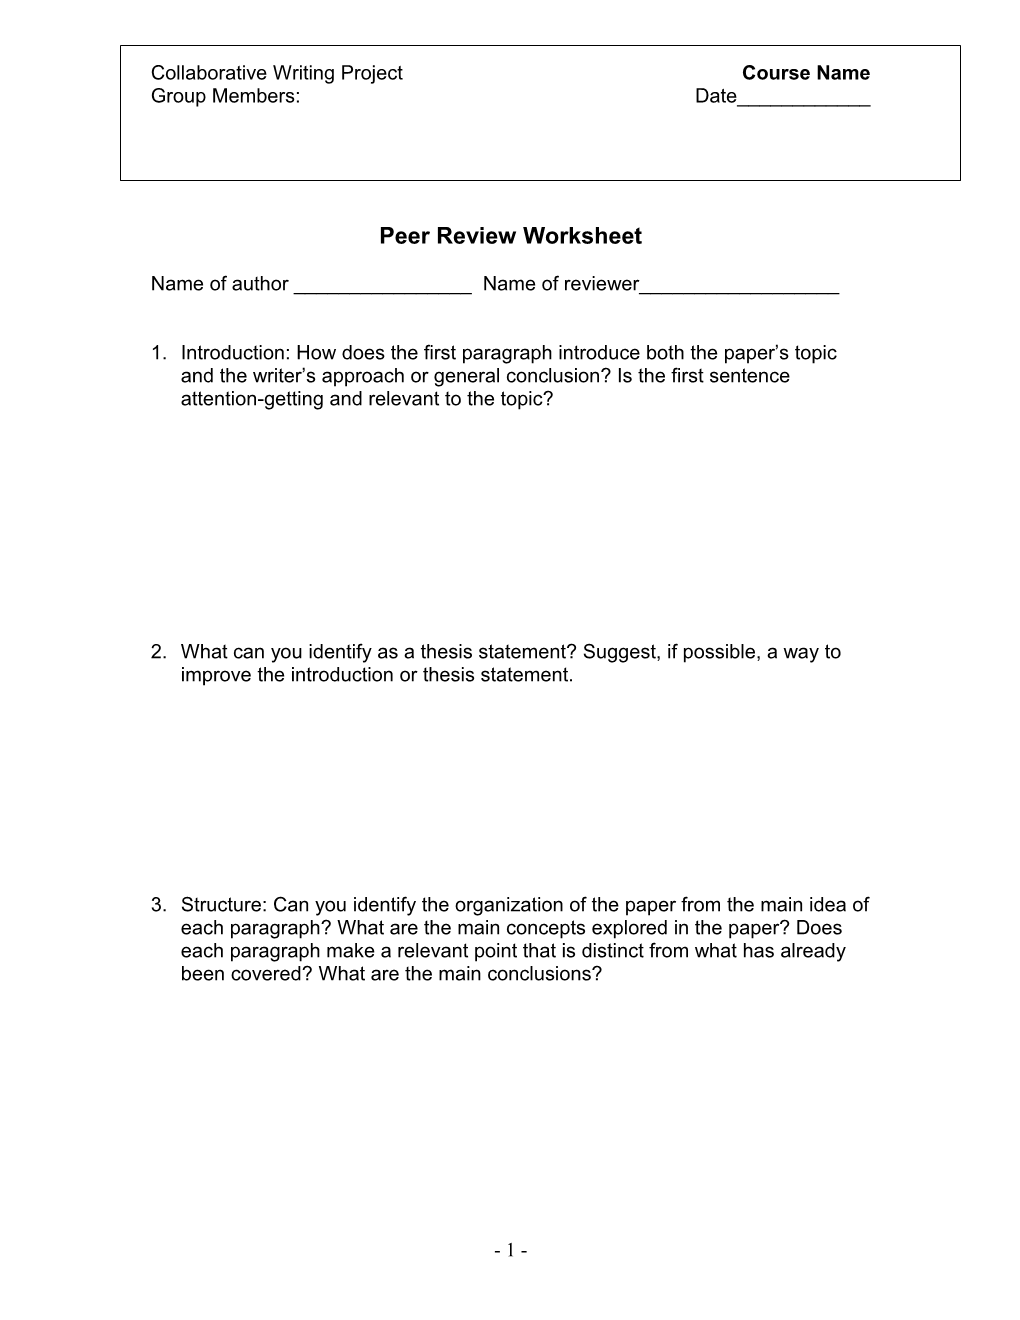 Peer Review Worksheet for ______(Name of Author)